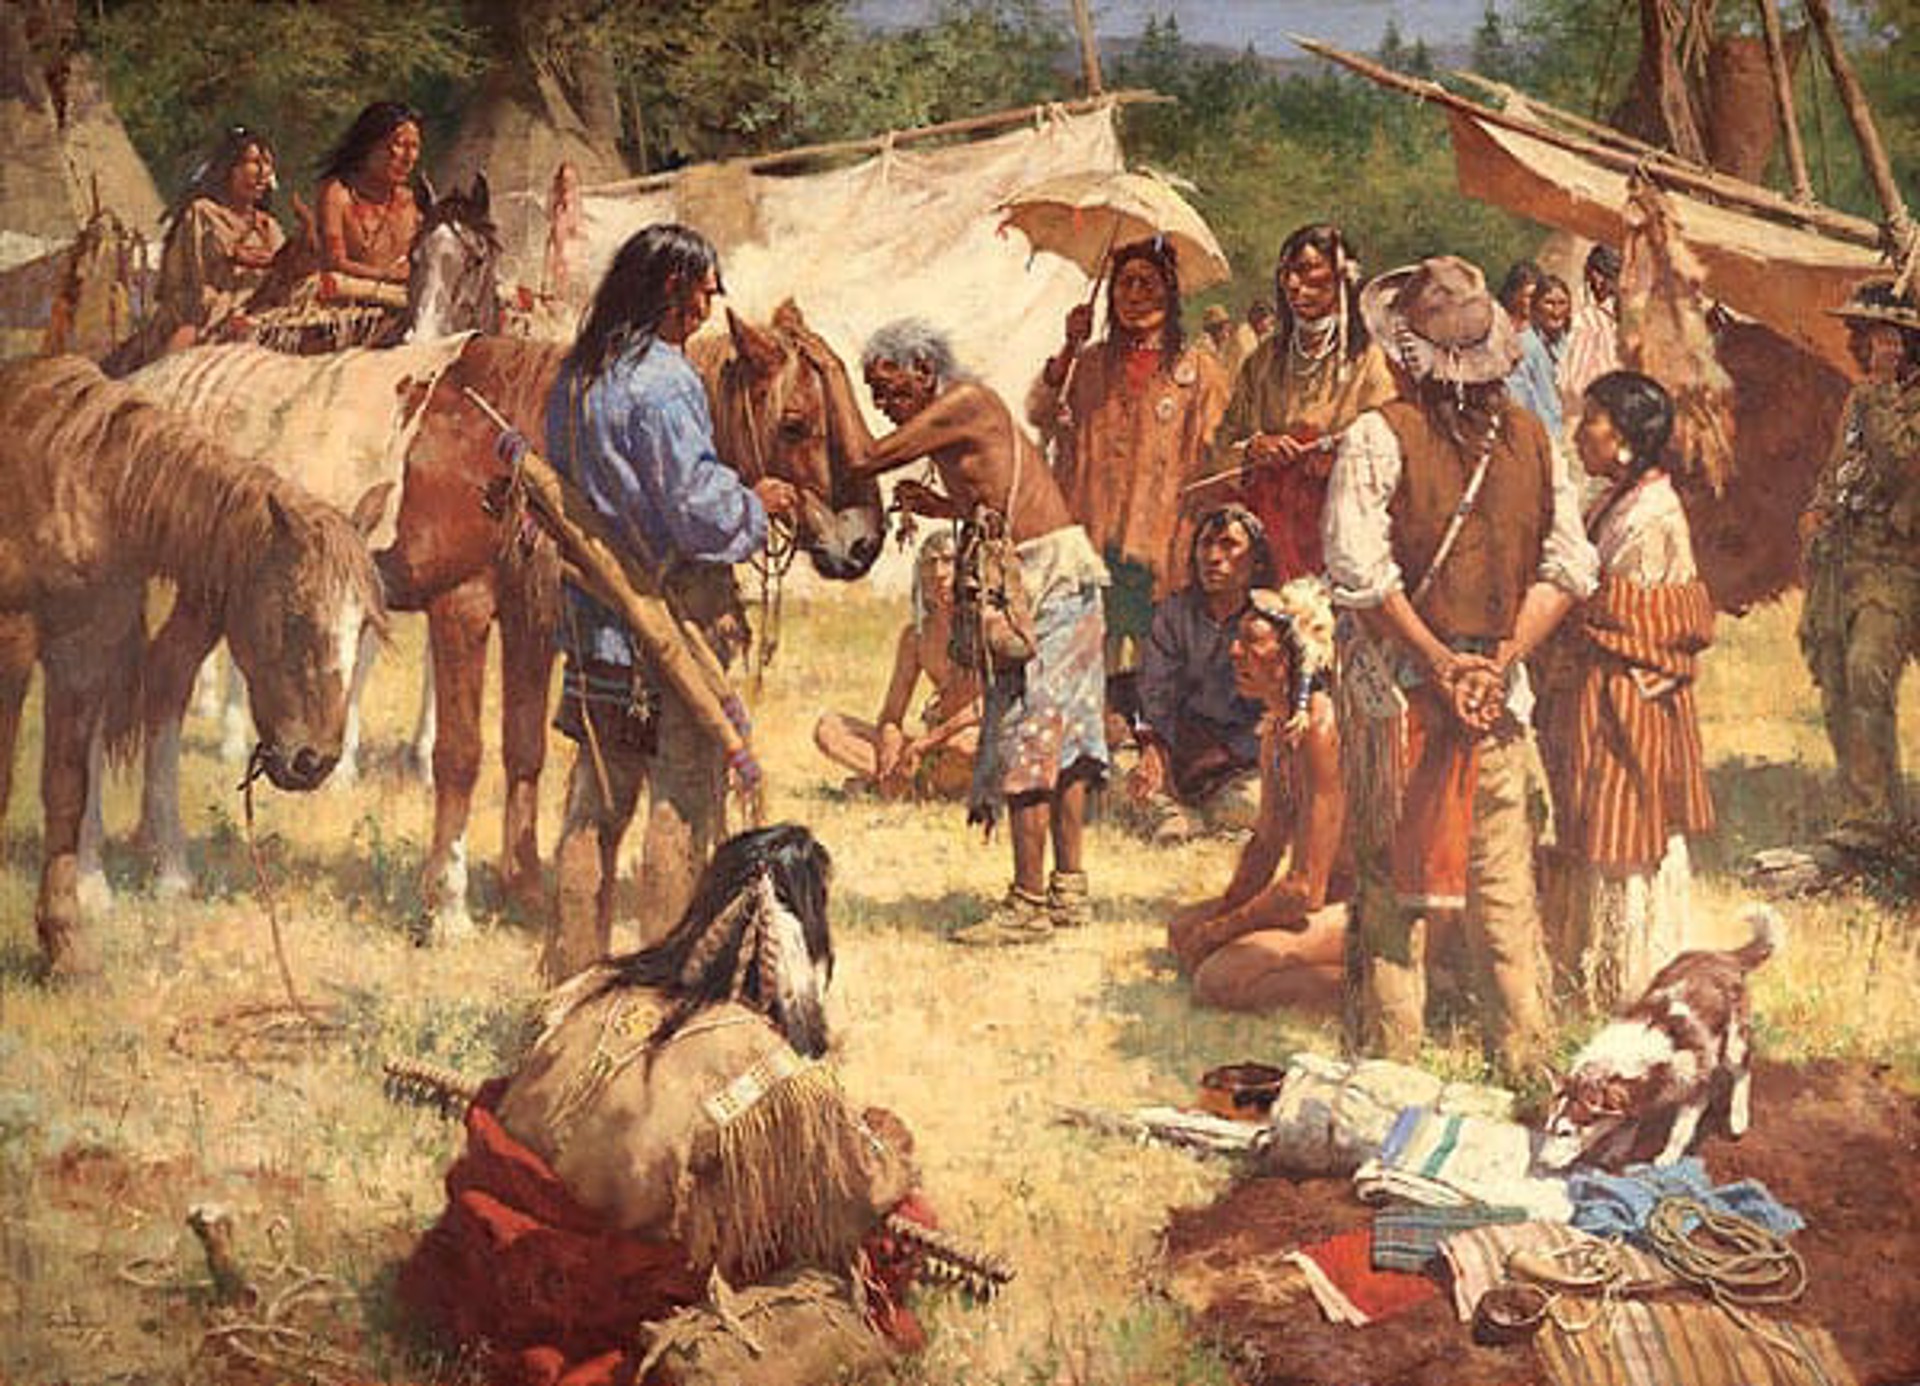 The Horse Doctor and His Medicine Bag at Rendezvous by Howard Terpning